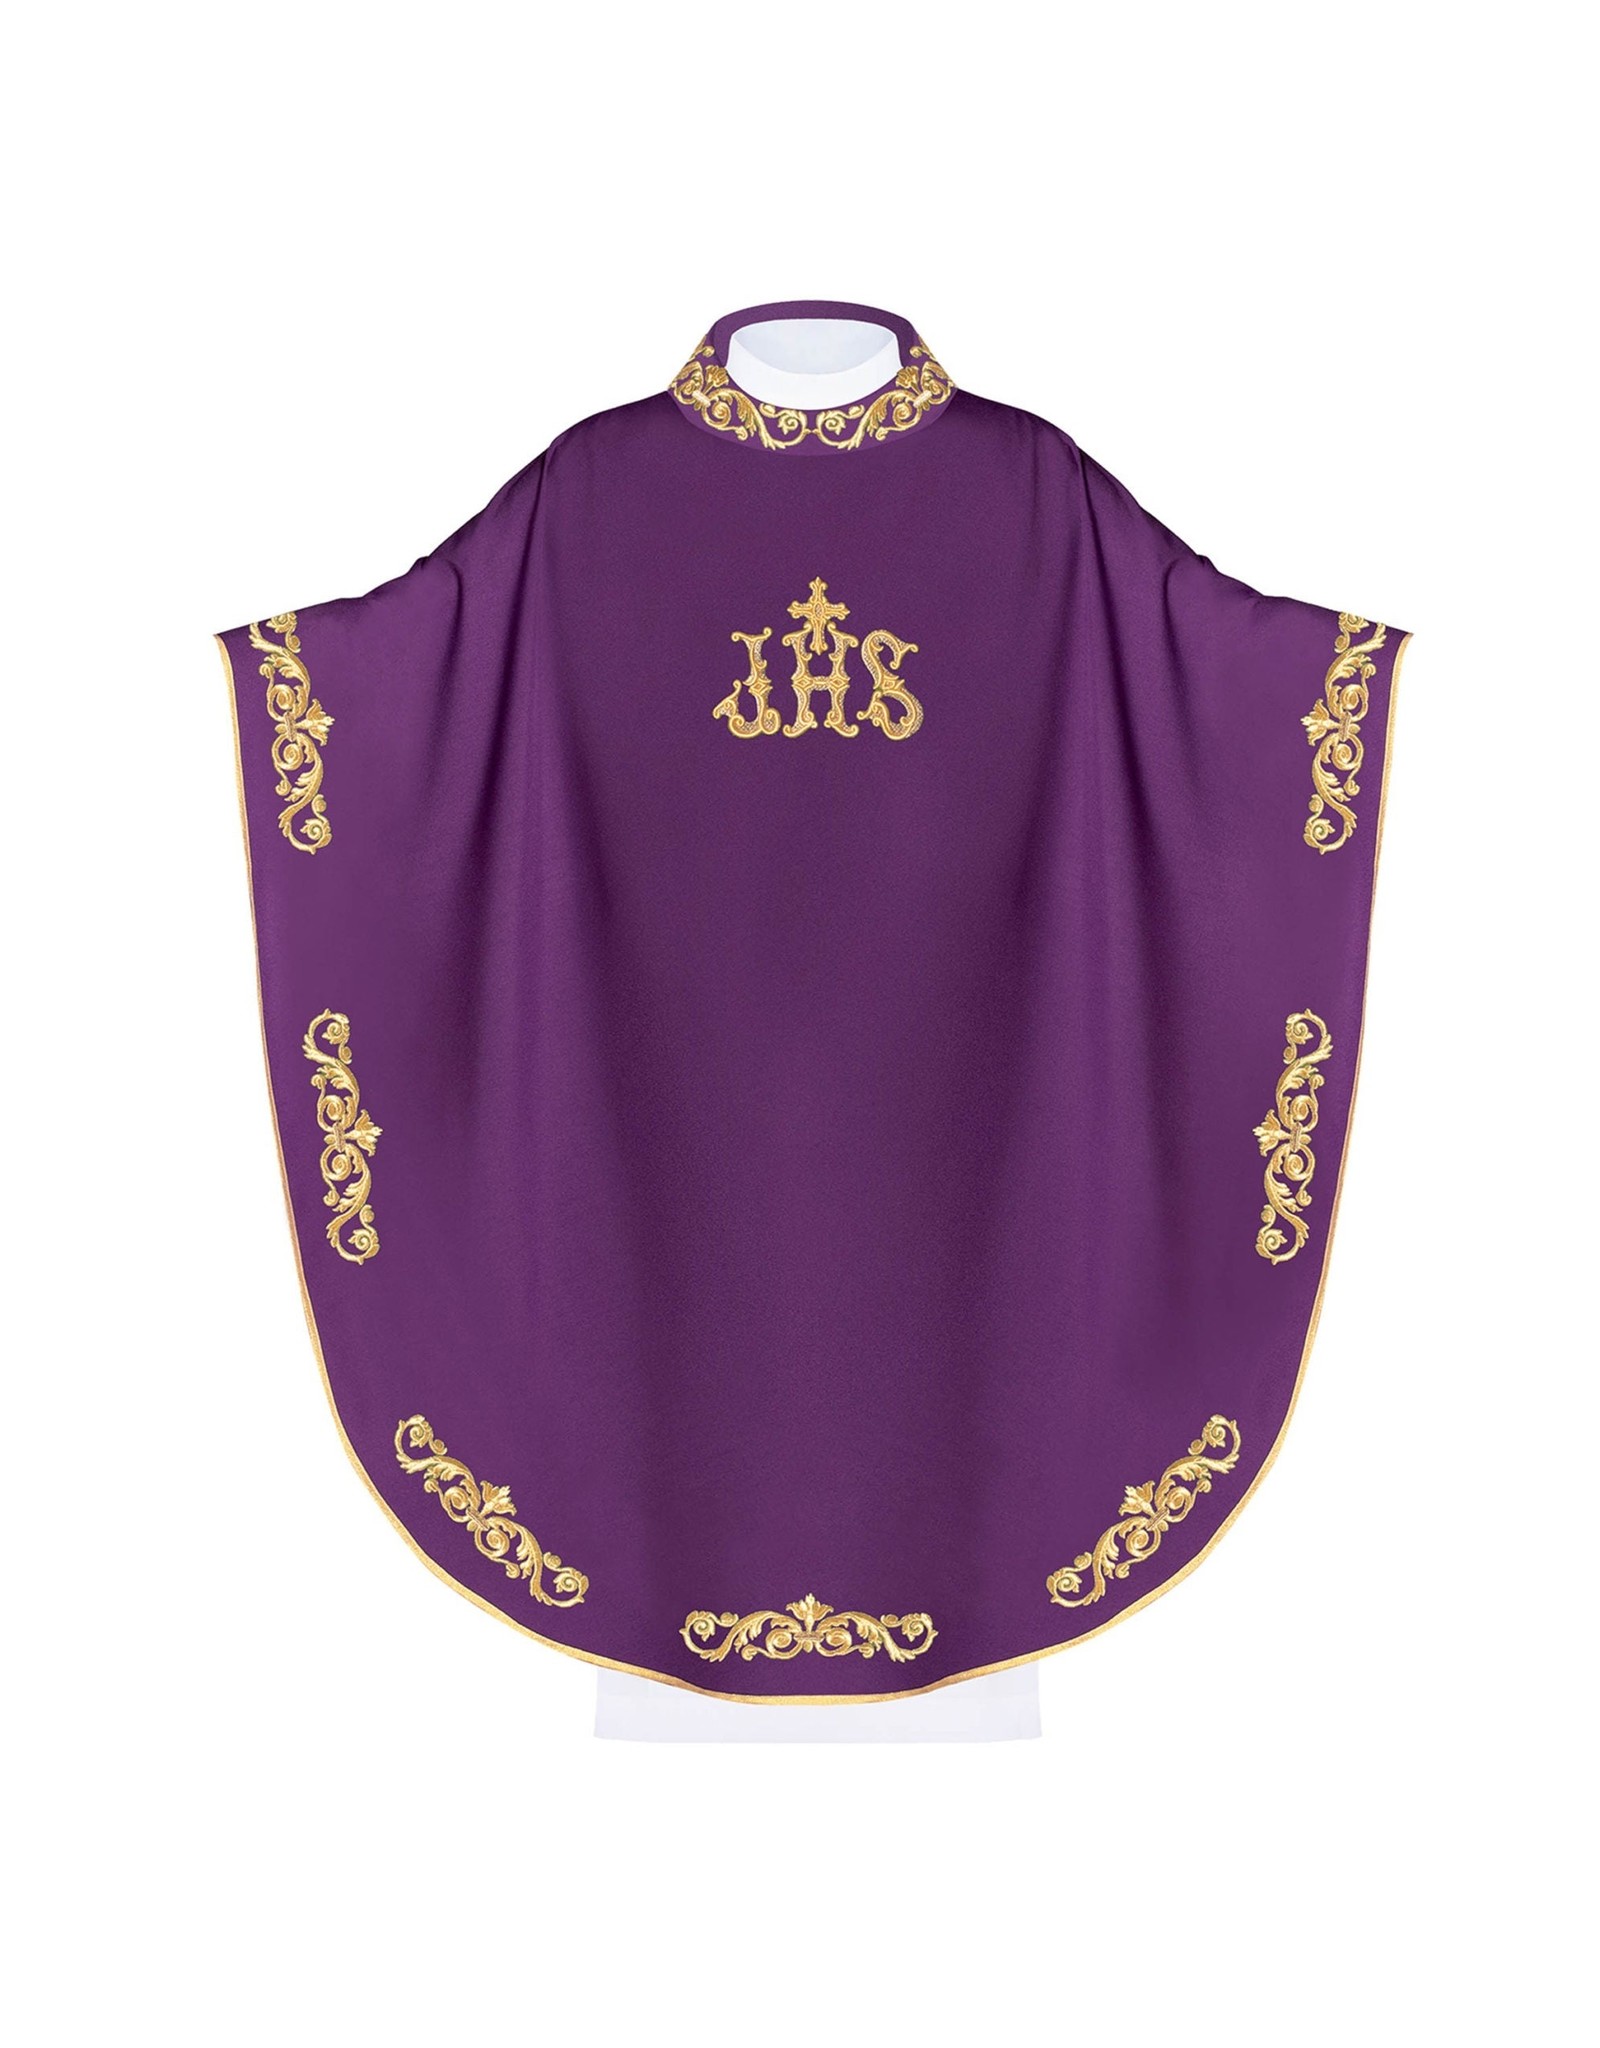 Haftina Chasuble - Poly/Wool with IHS Design